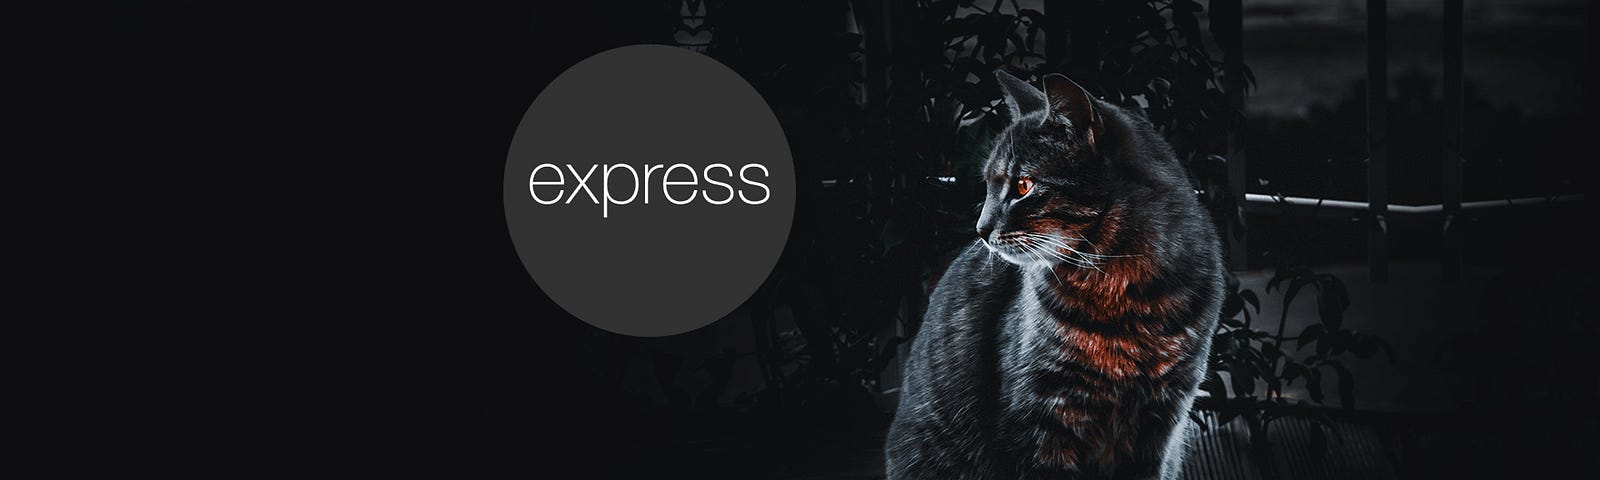 Nest looking at Express